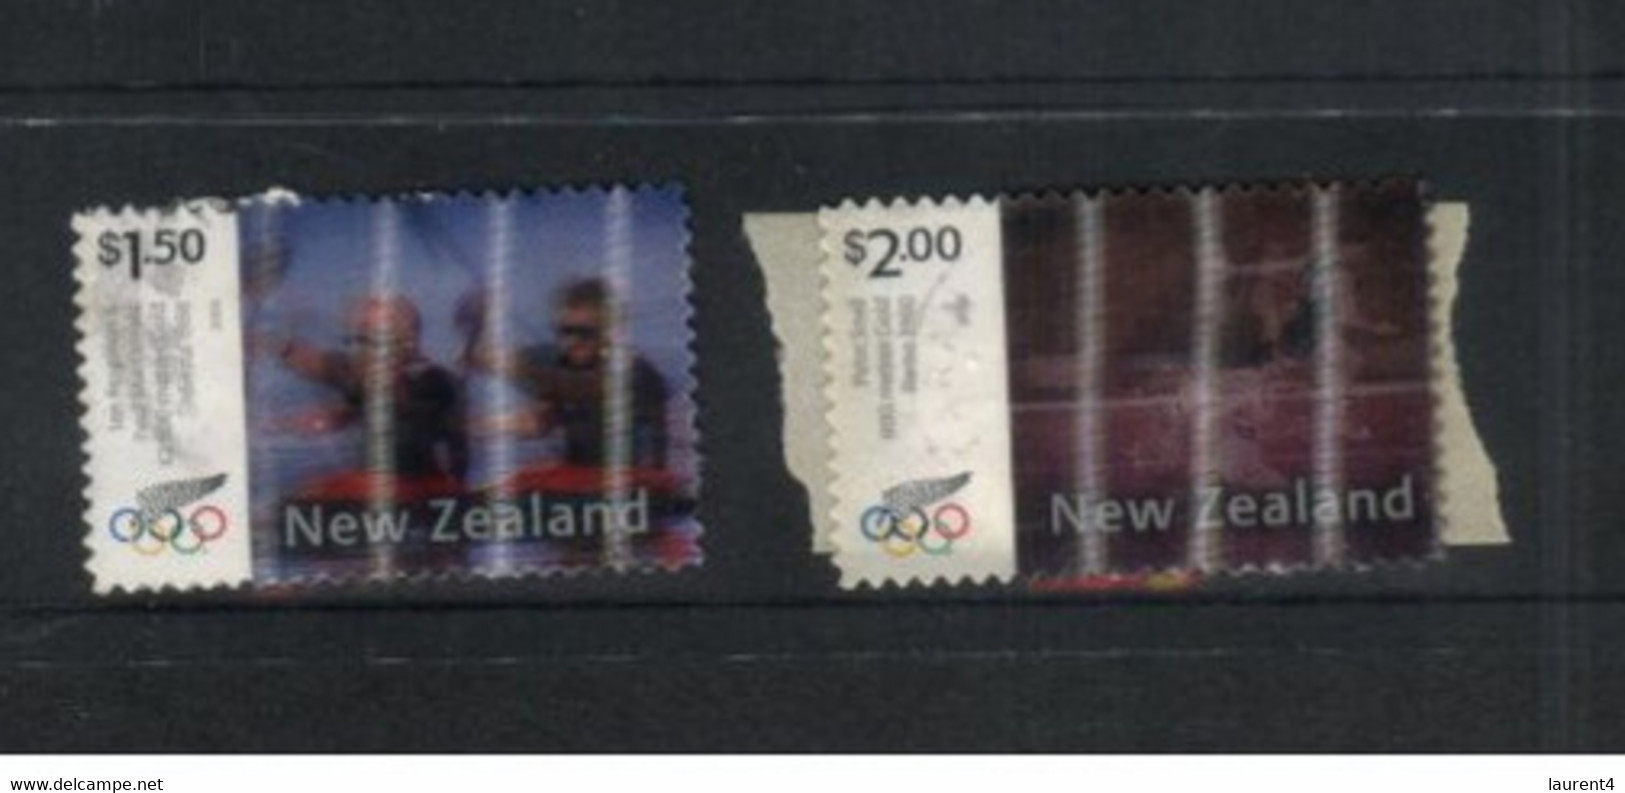 (Stamps 21-10-2020) New Zeland - 4 Used Stamps (inclding 2 Olympic Gold Medalist 3-D Stamps) - Gebraucht